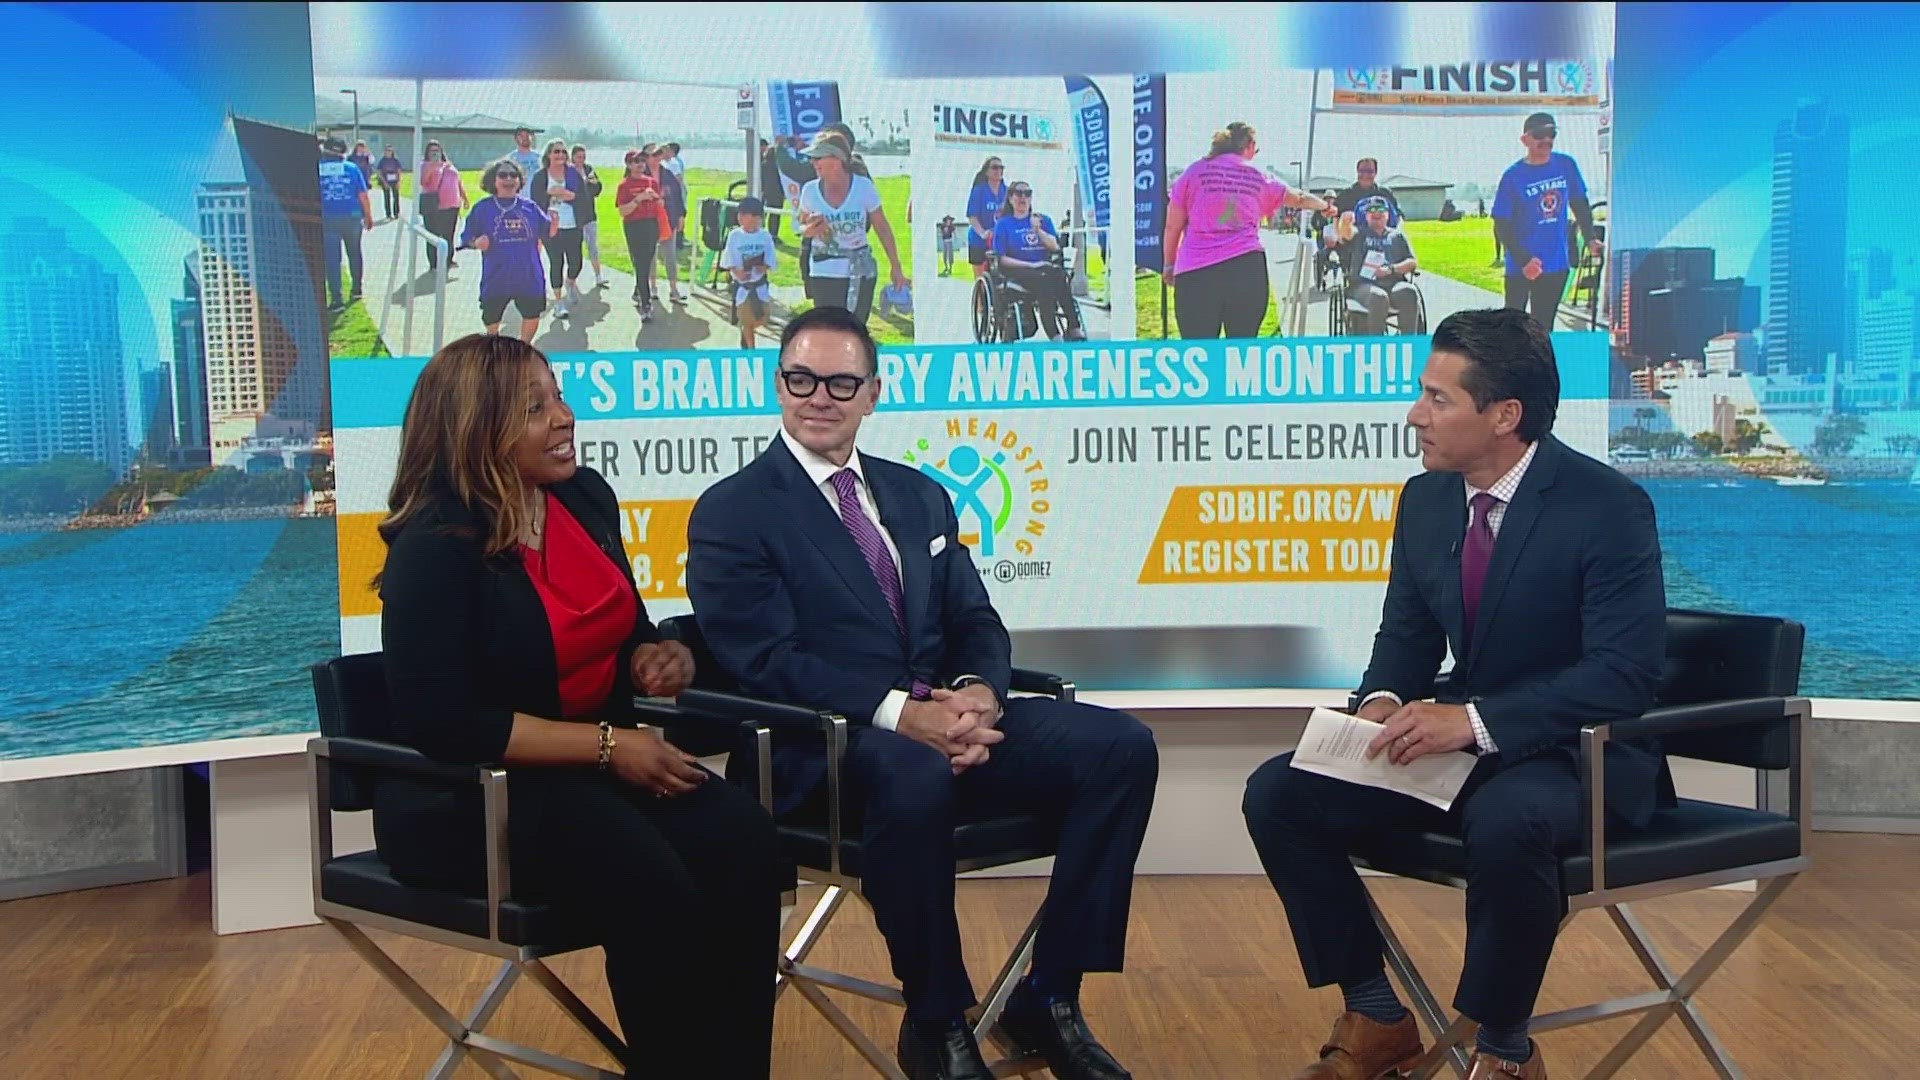 John Gomez and Roslyn Kno talked about brain injuries, Saturday’s event and what the Brain Injury Foundation does.